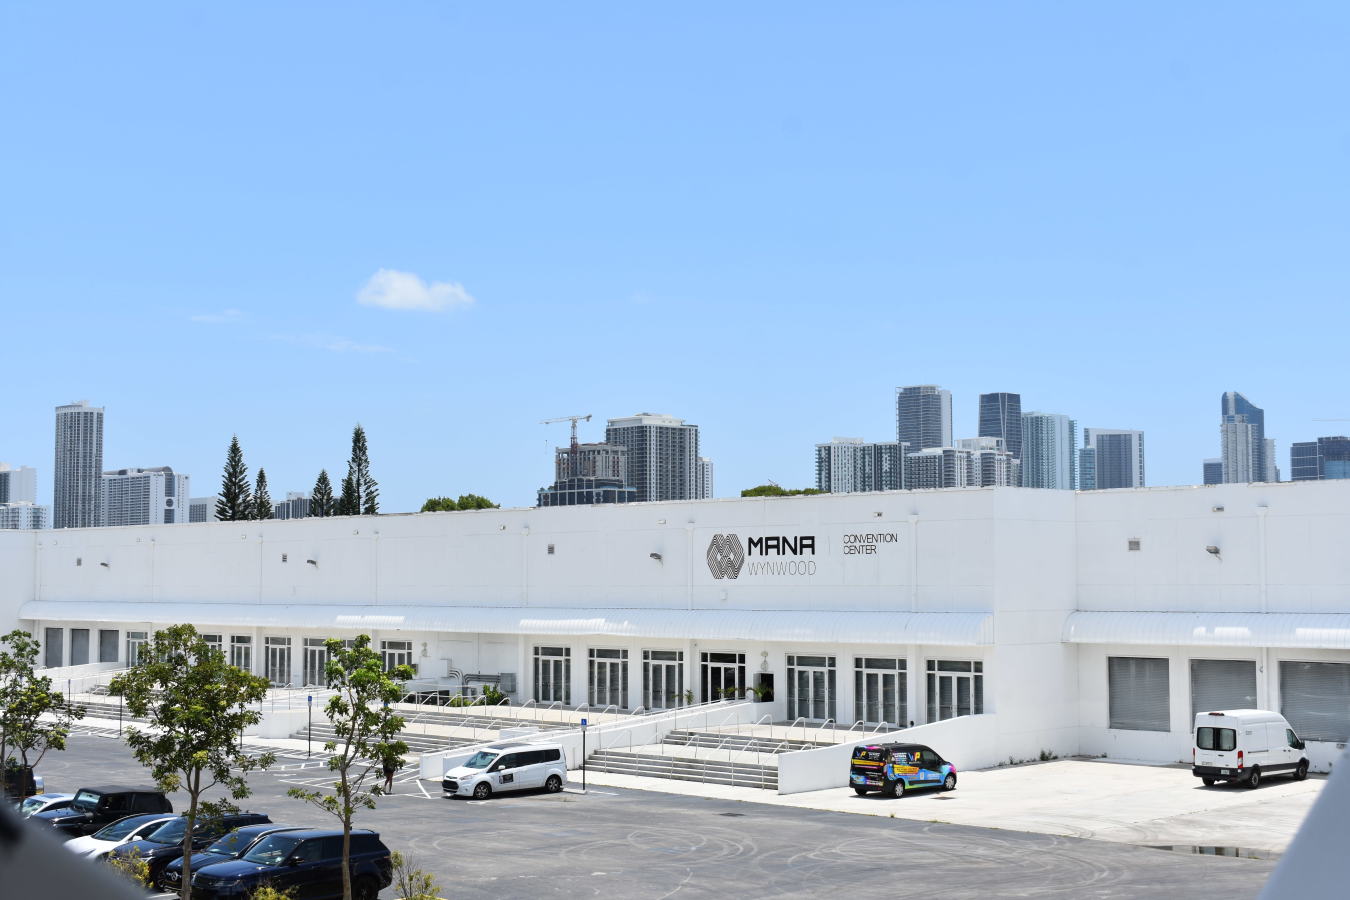 This full-service convention center is the crown jewel of the Mana Wynwood campus, offering a spacious 100,000 sq ft air-conditioned facility.